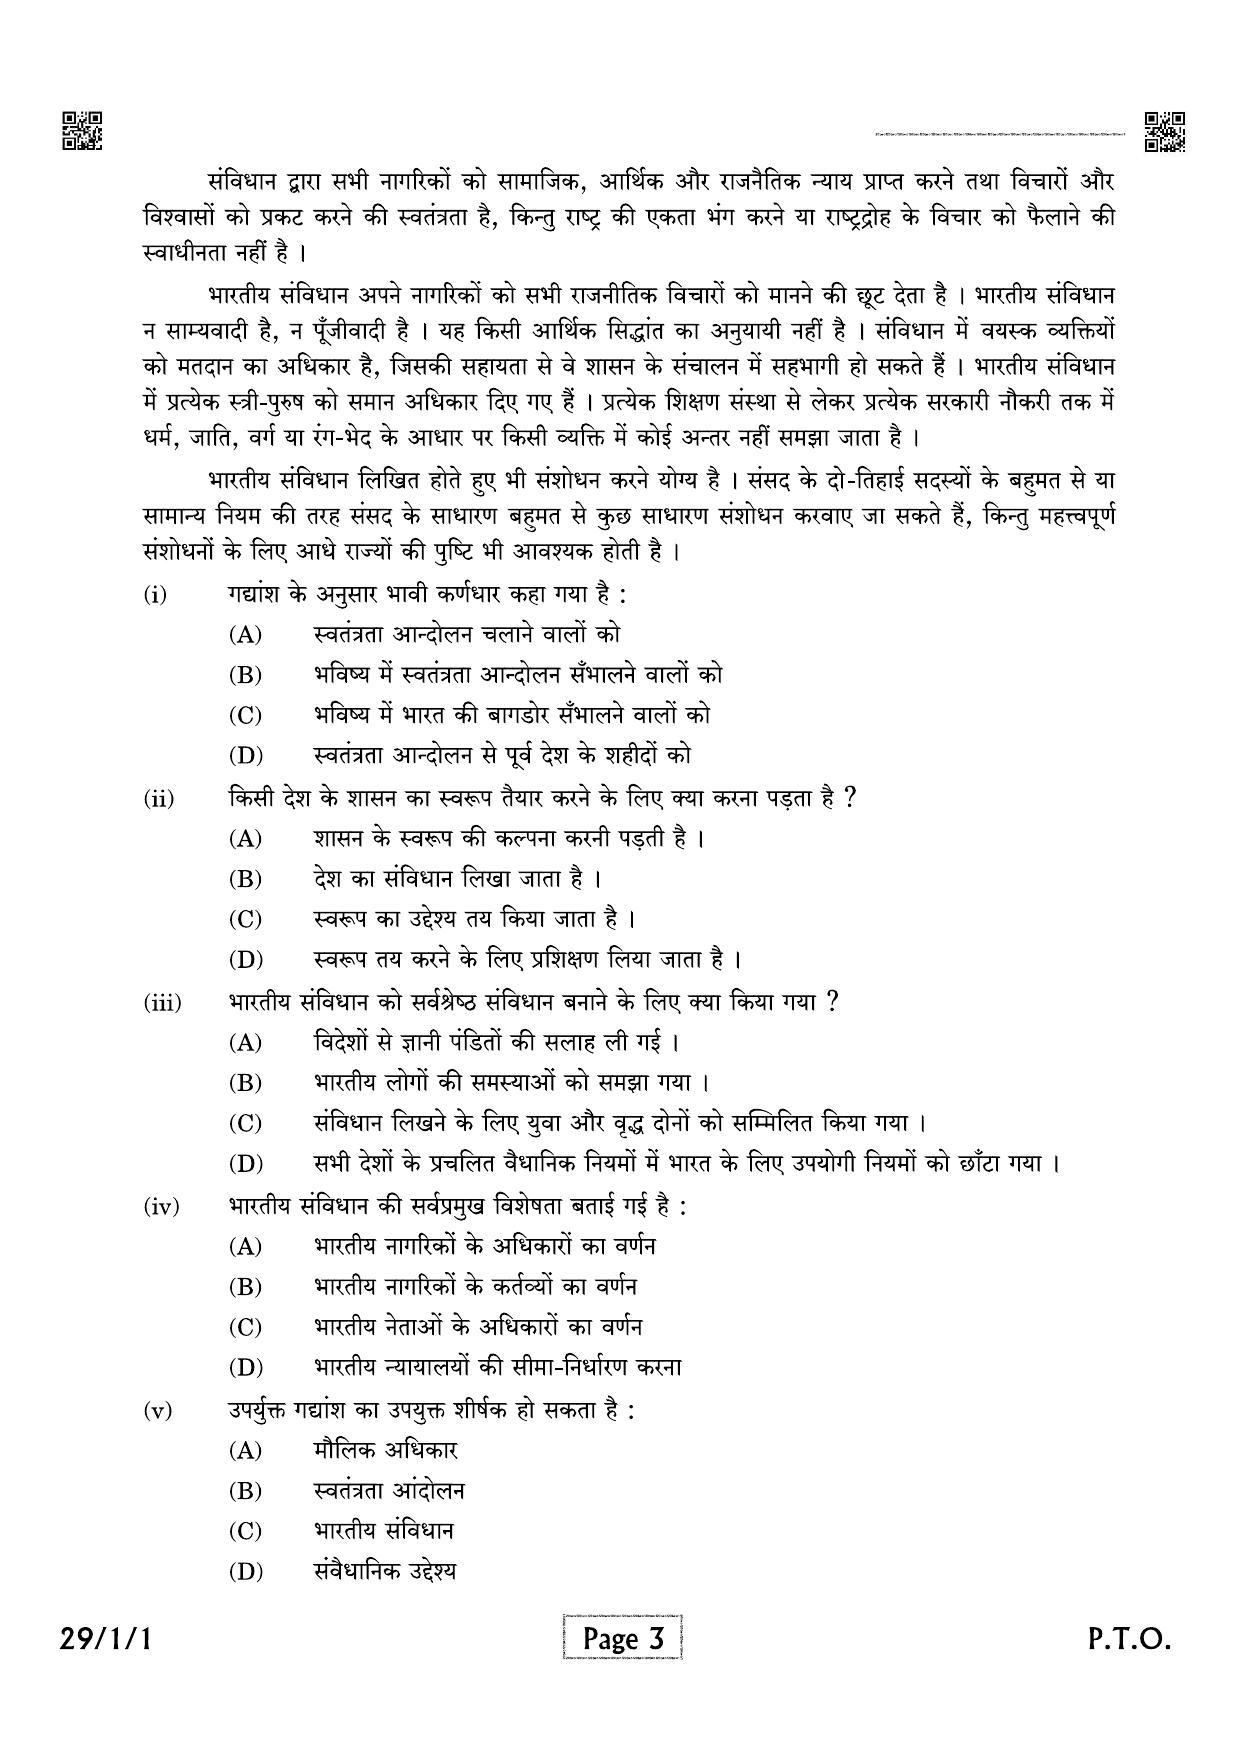 CBSE Class 12 QP_002_HINDI_ELECTIVE 2021 Compartment Question Paper - Page 3